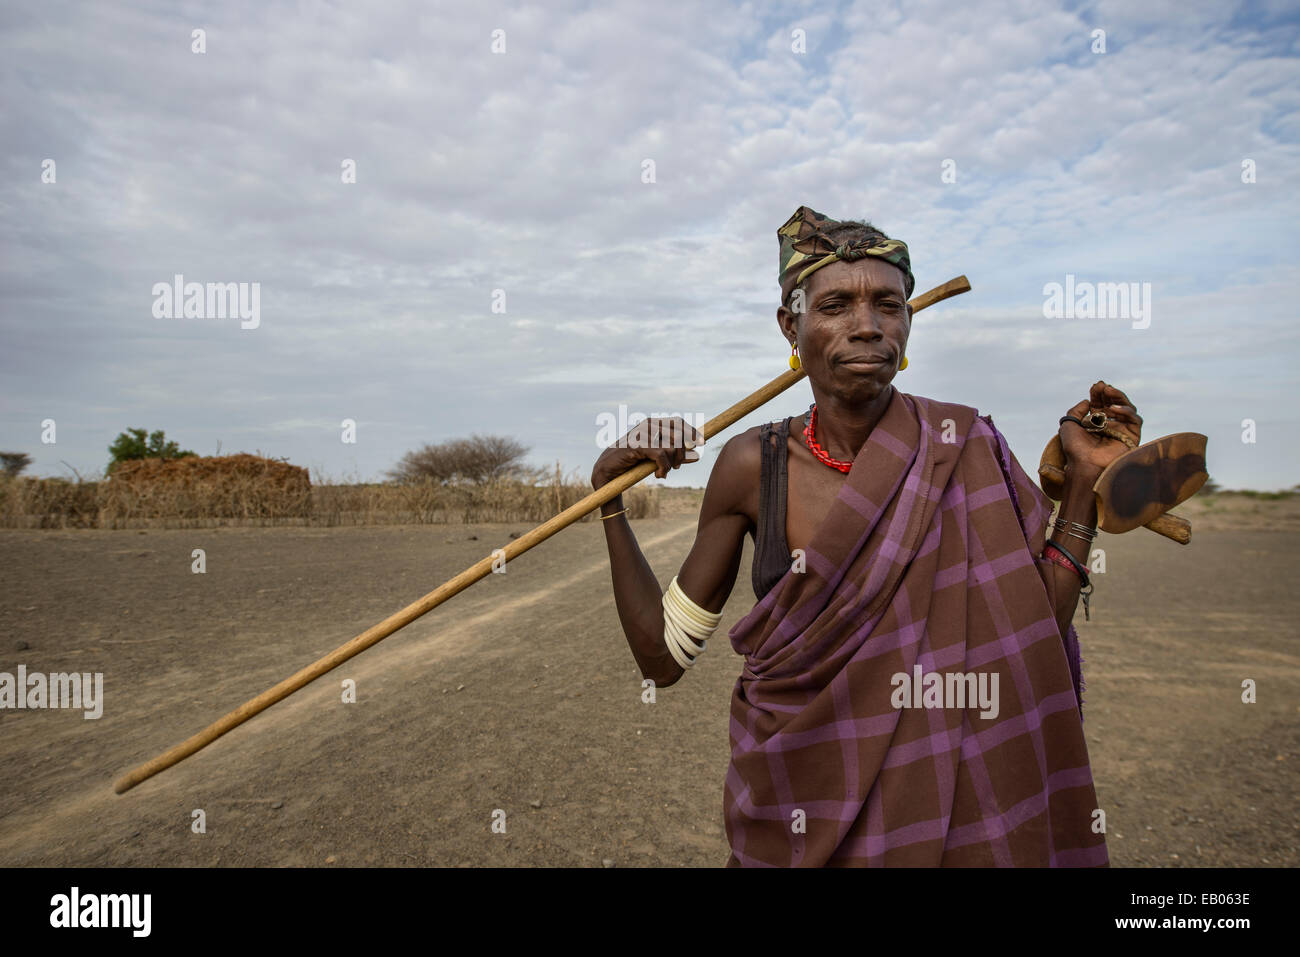 A Turkana warrior showing his cane and the neck piece for resting, Kenya Stock Photo